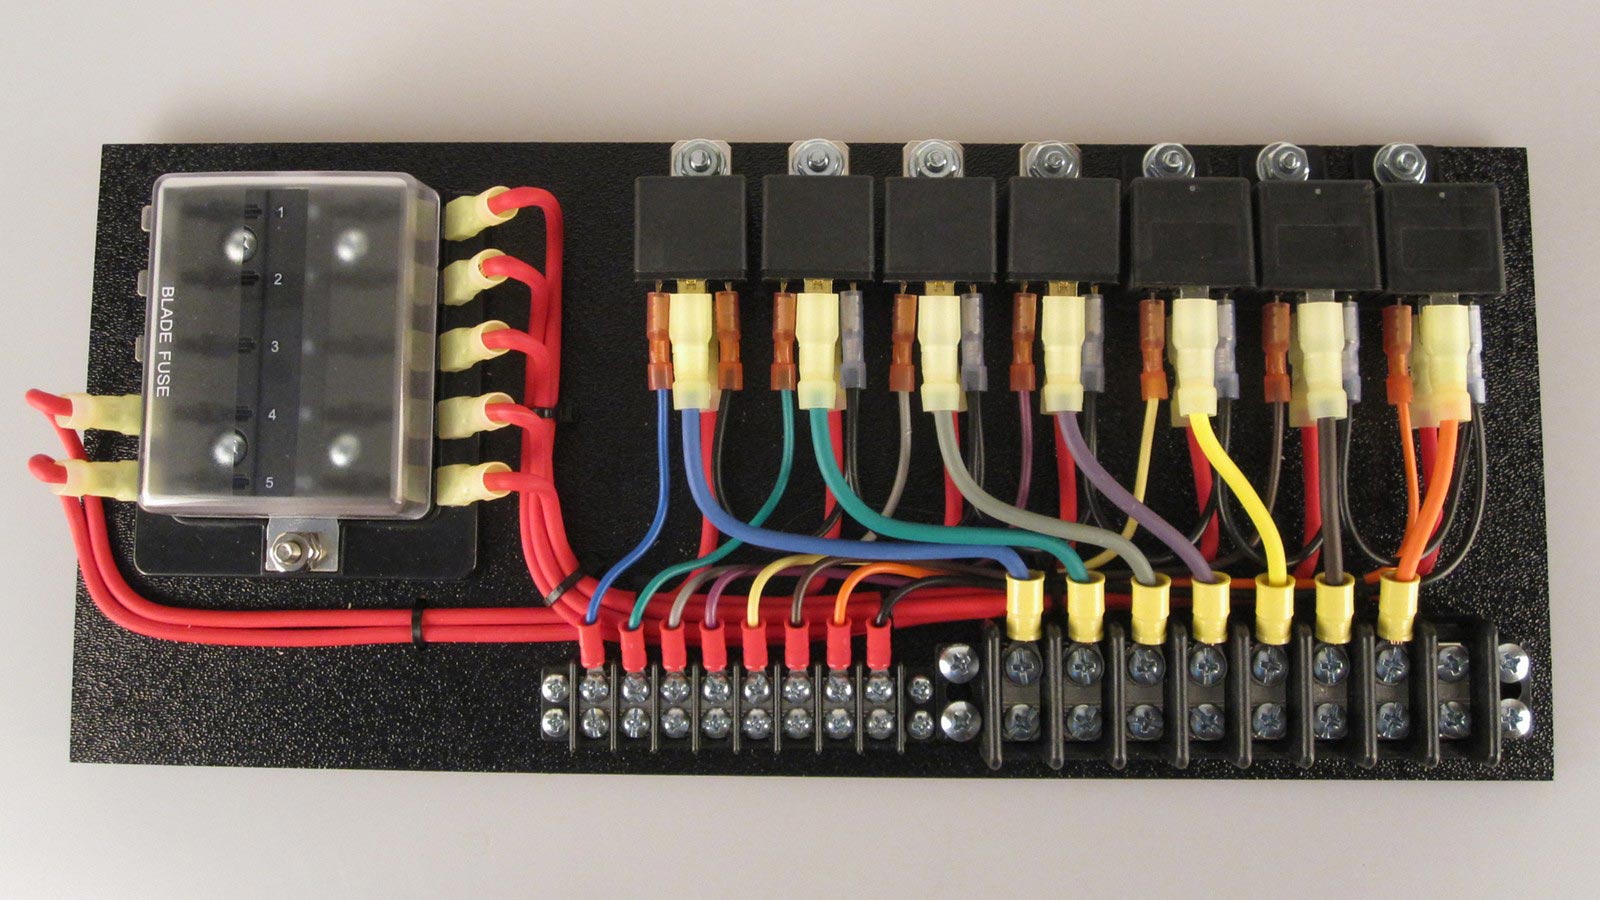 7-Relay Panel with Push-ons with 10-pos ATC Fuse Panel